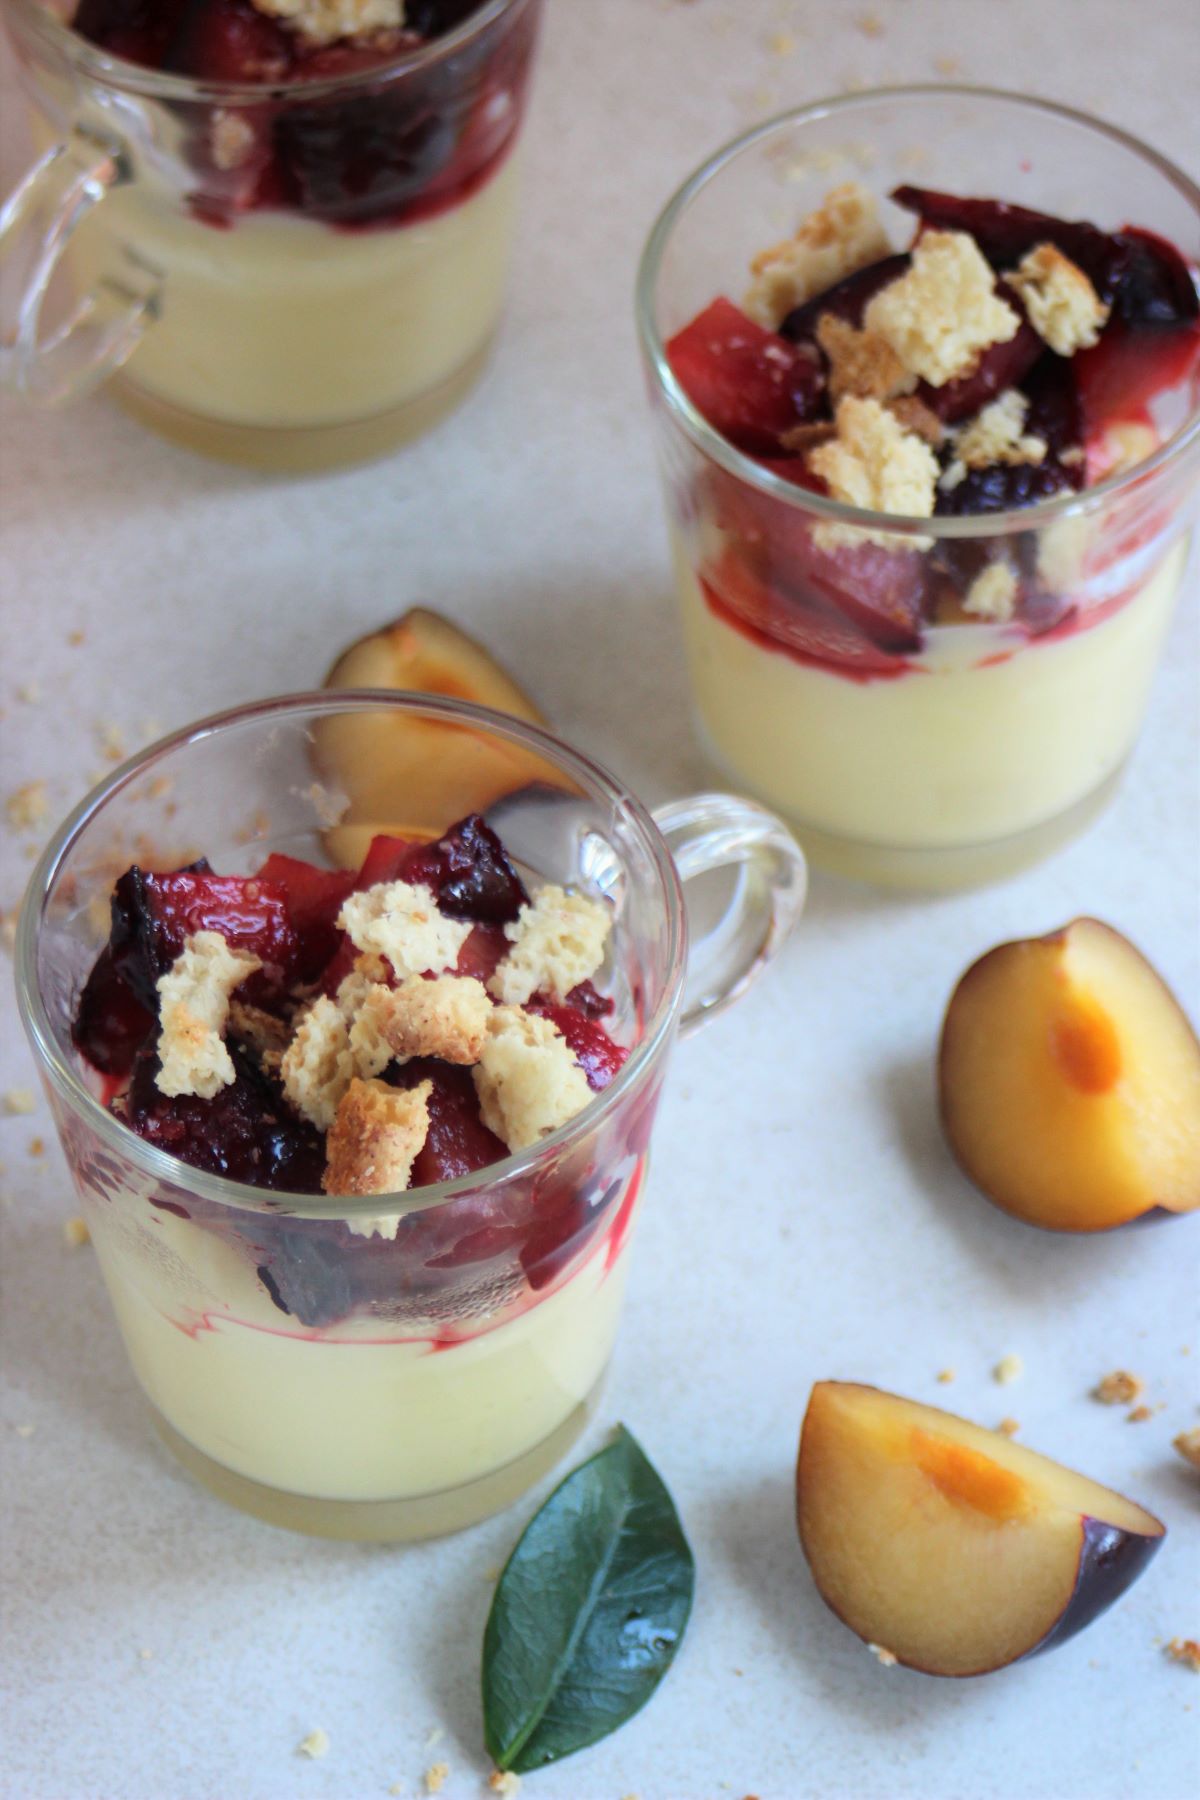 Glass jars with cream, plum compote, and crumbs. Slices of plums on the side.